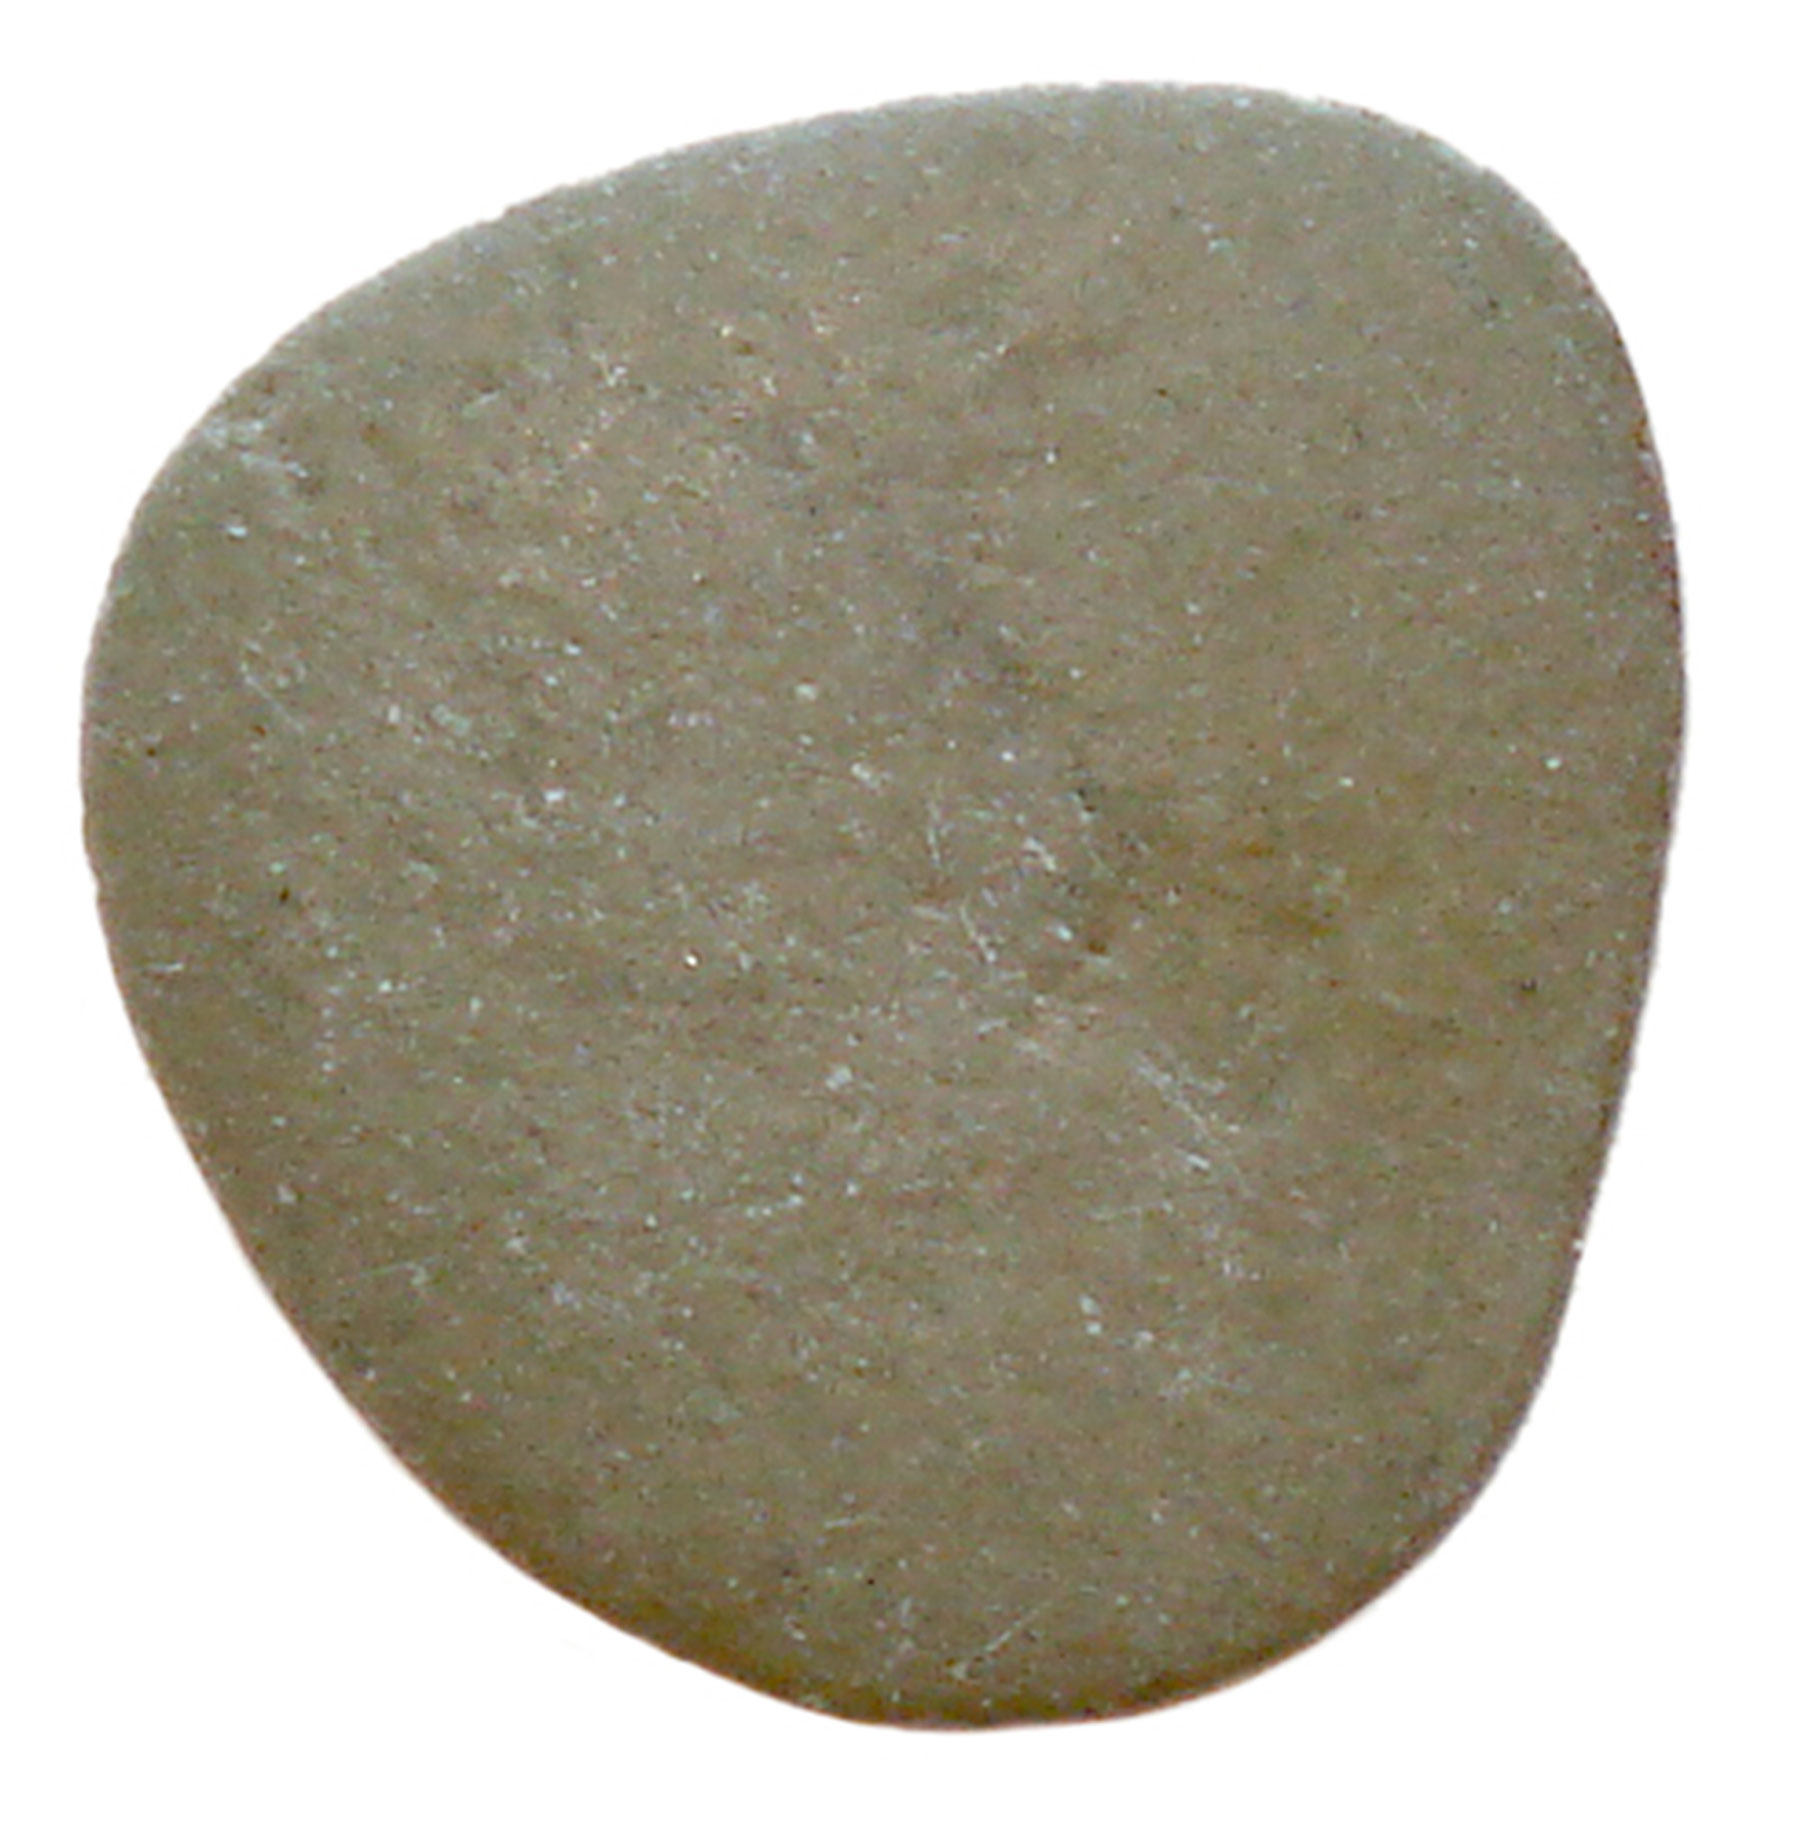 A photograph of a rock which resembles a guitar pick. 